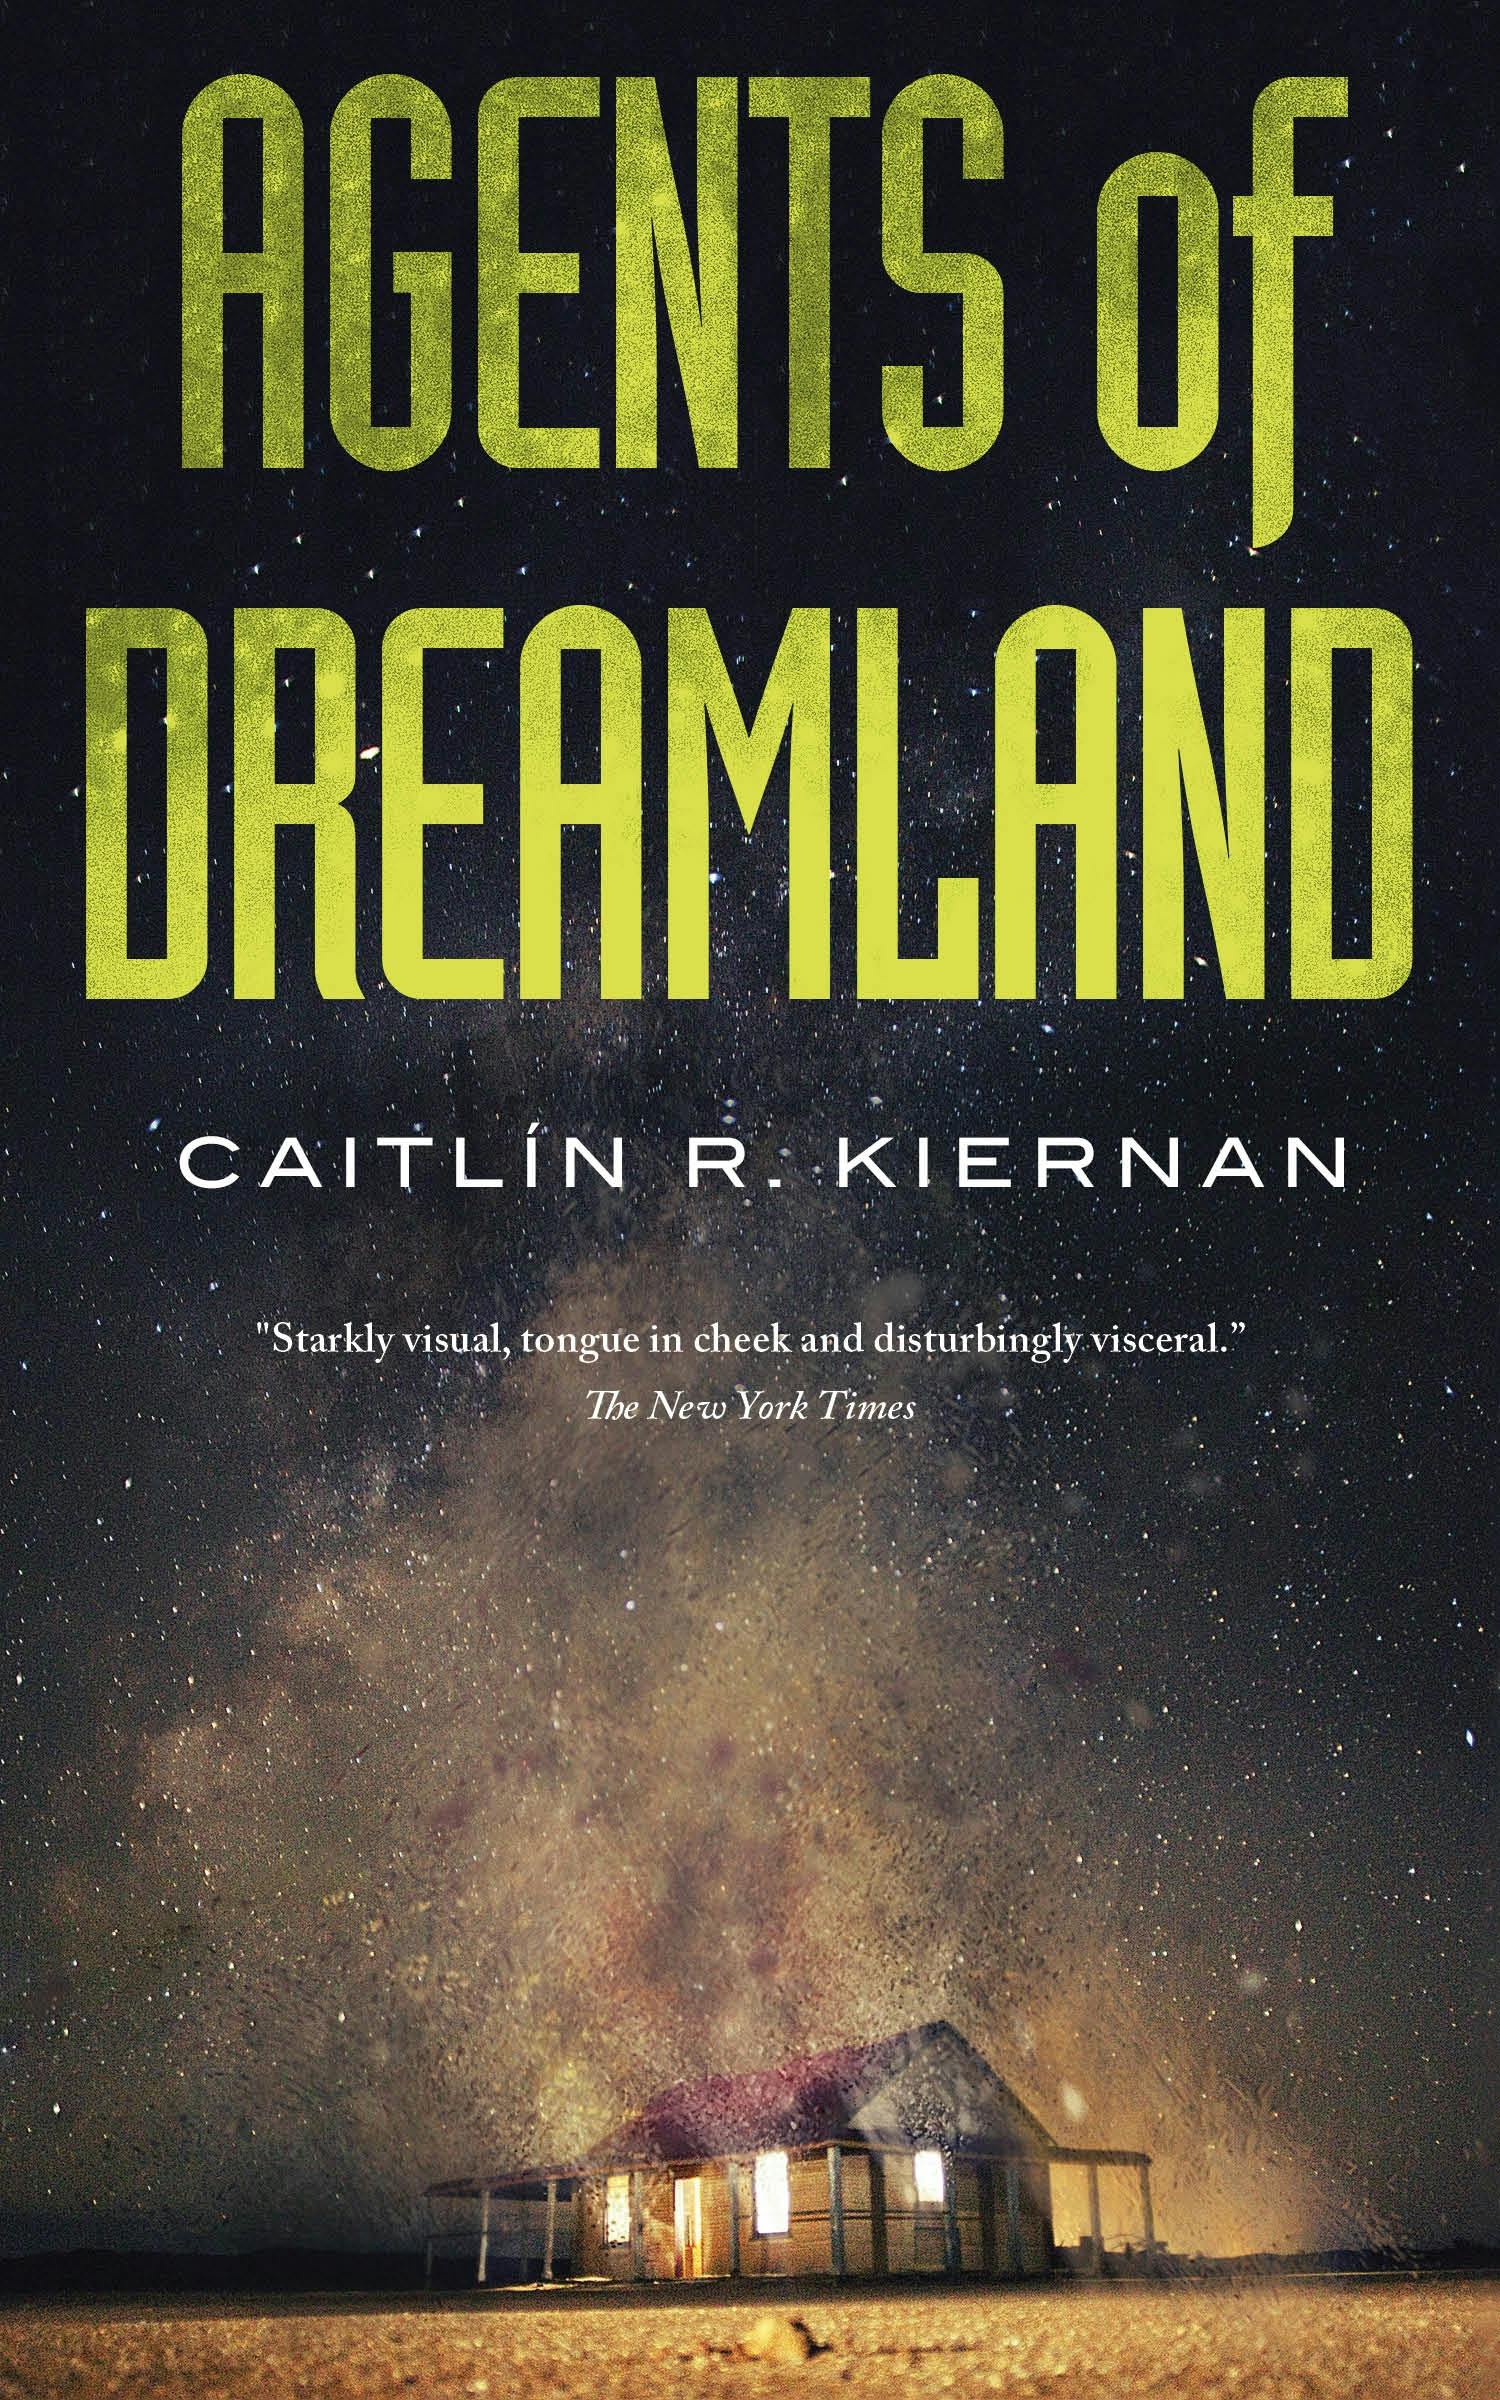 Cover for the book titled as: Agents of Dreamland